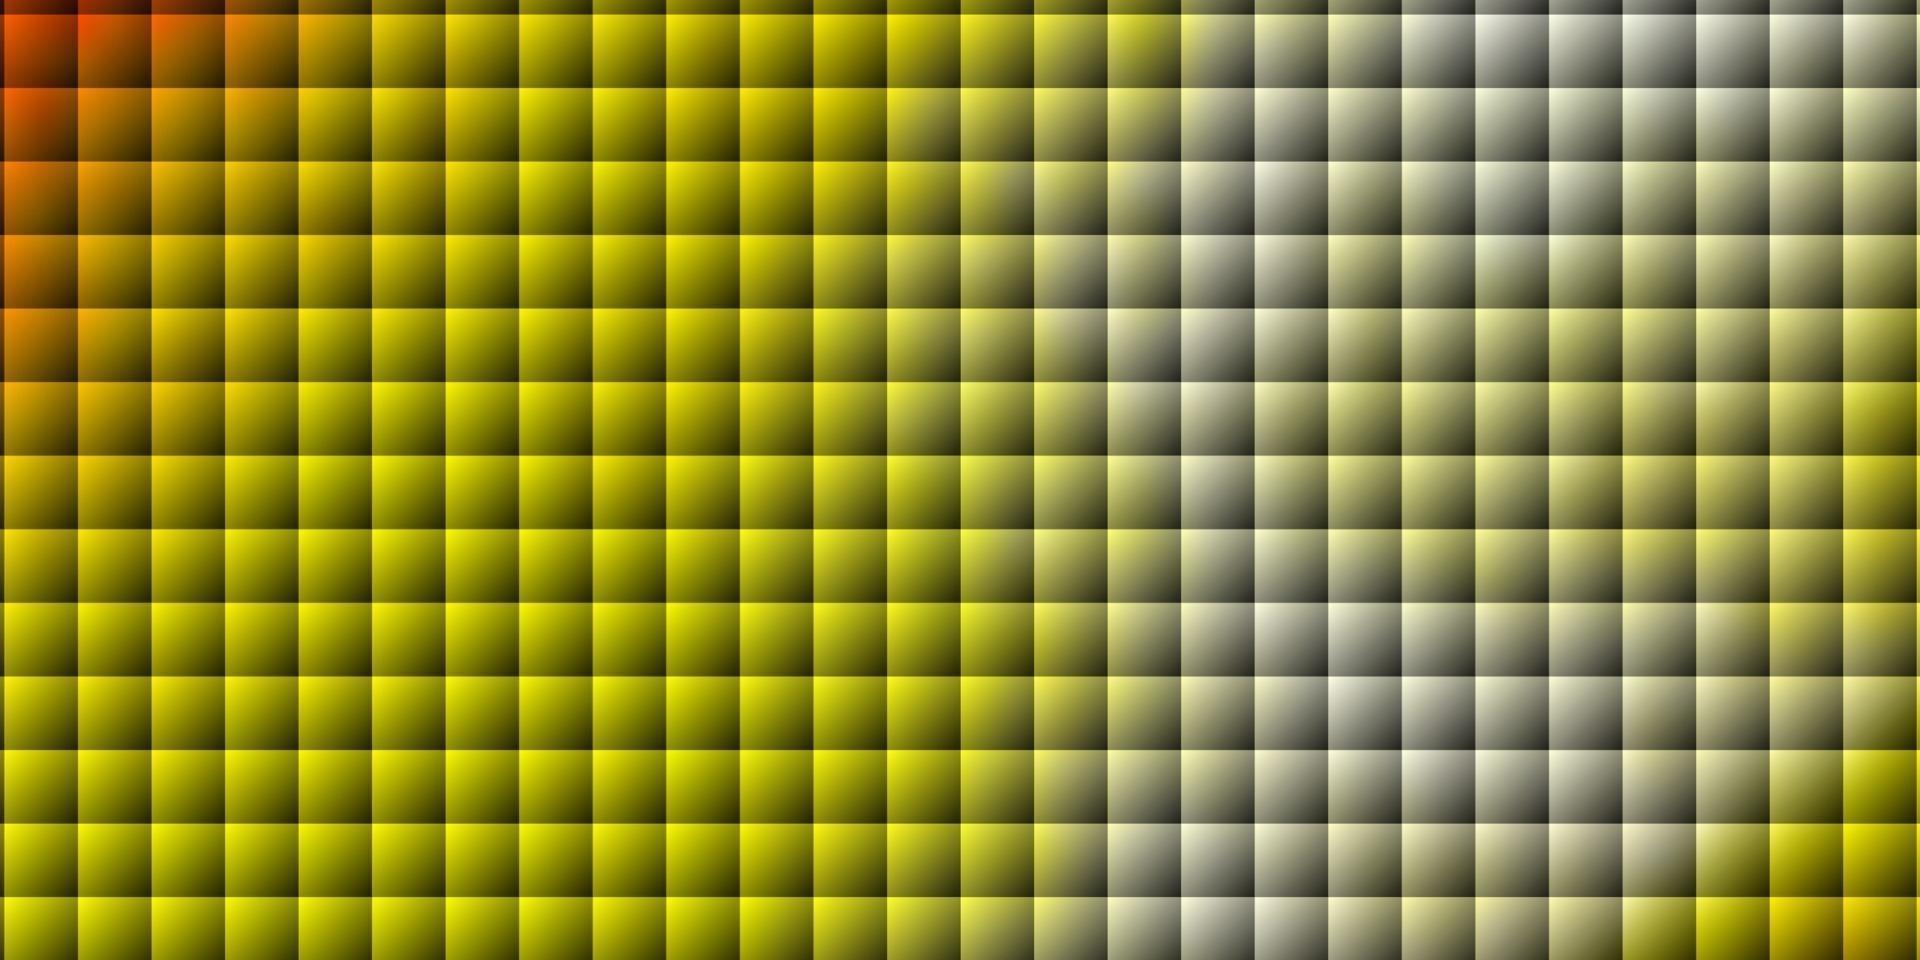 Dark Yellow vector background with rectangles.